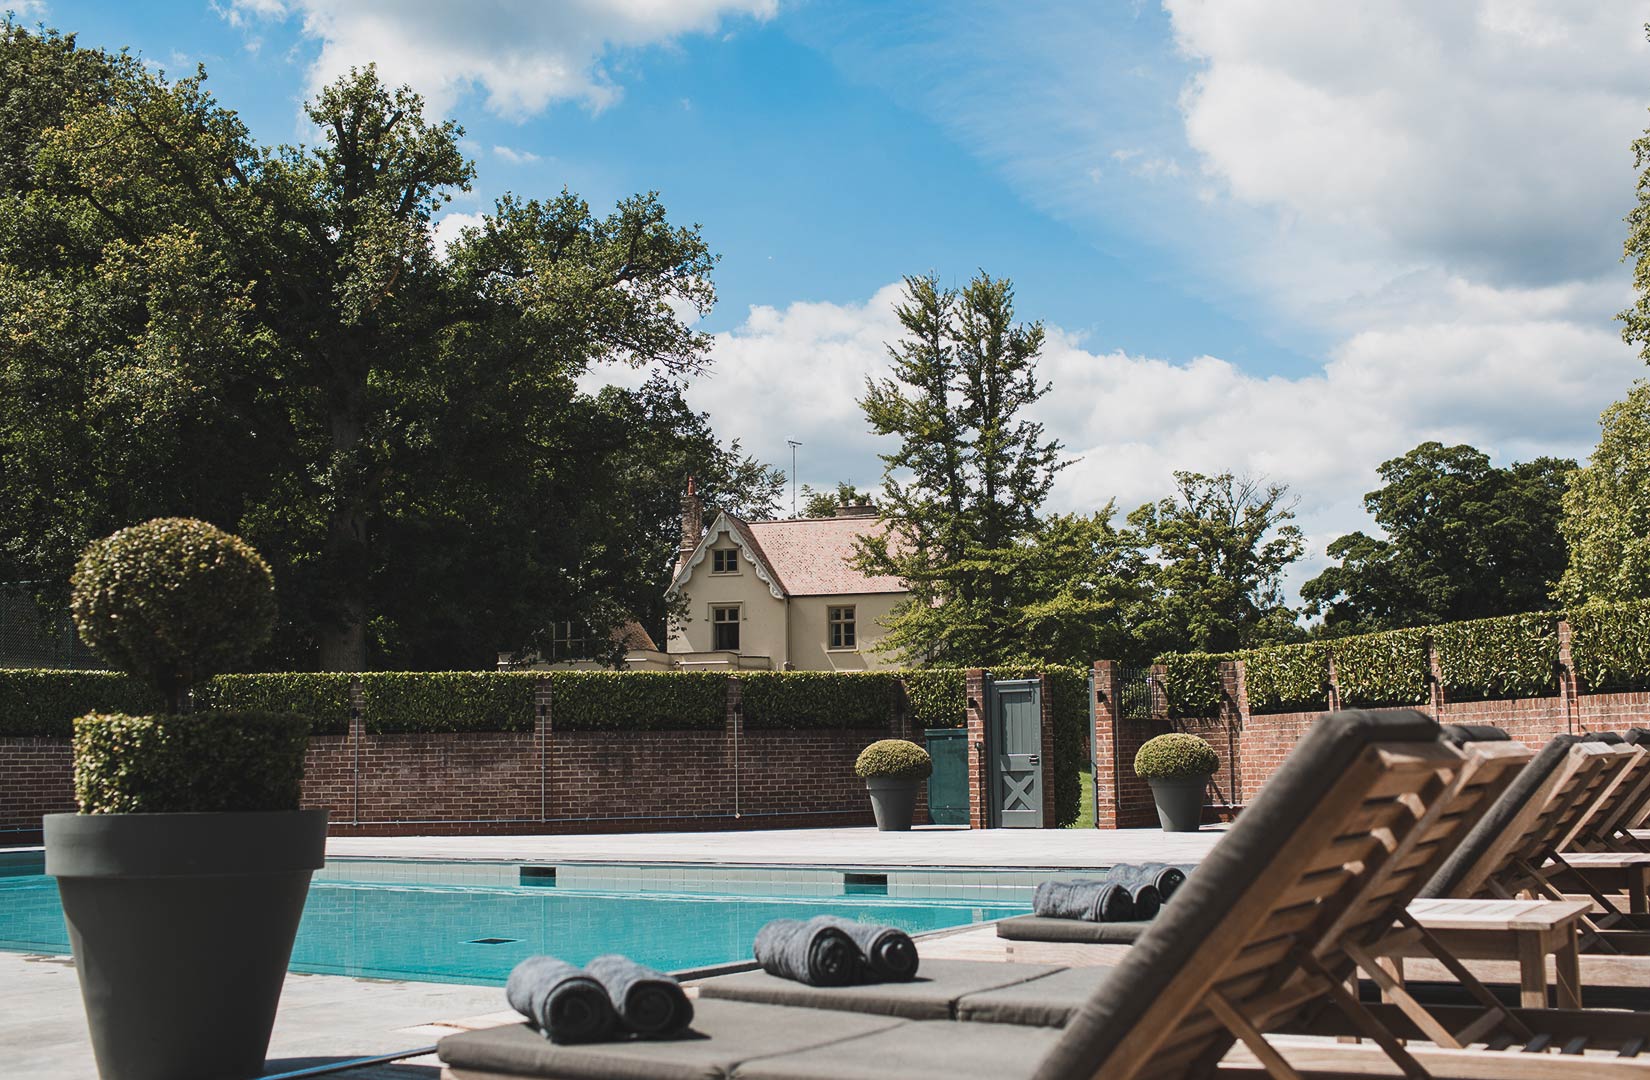 3 for 2 at Talbooth House & Spa